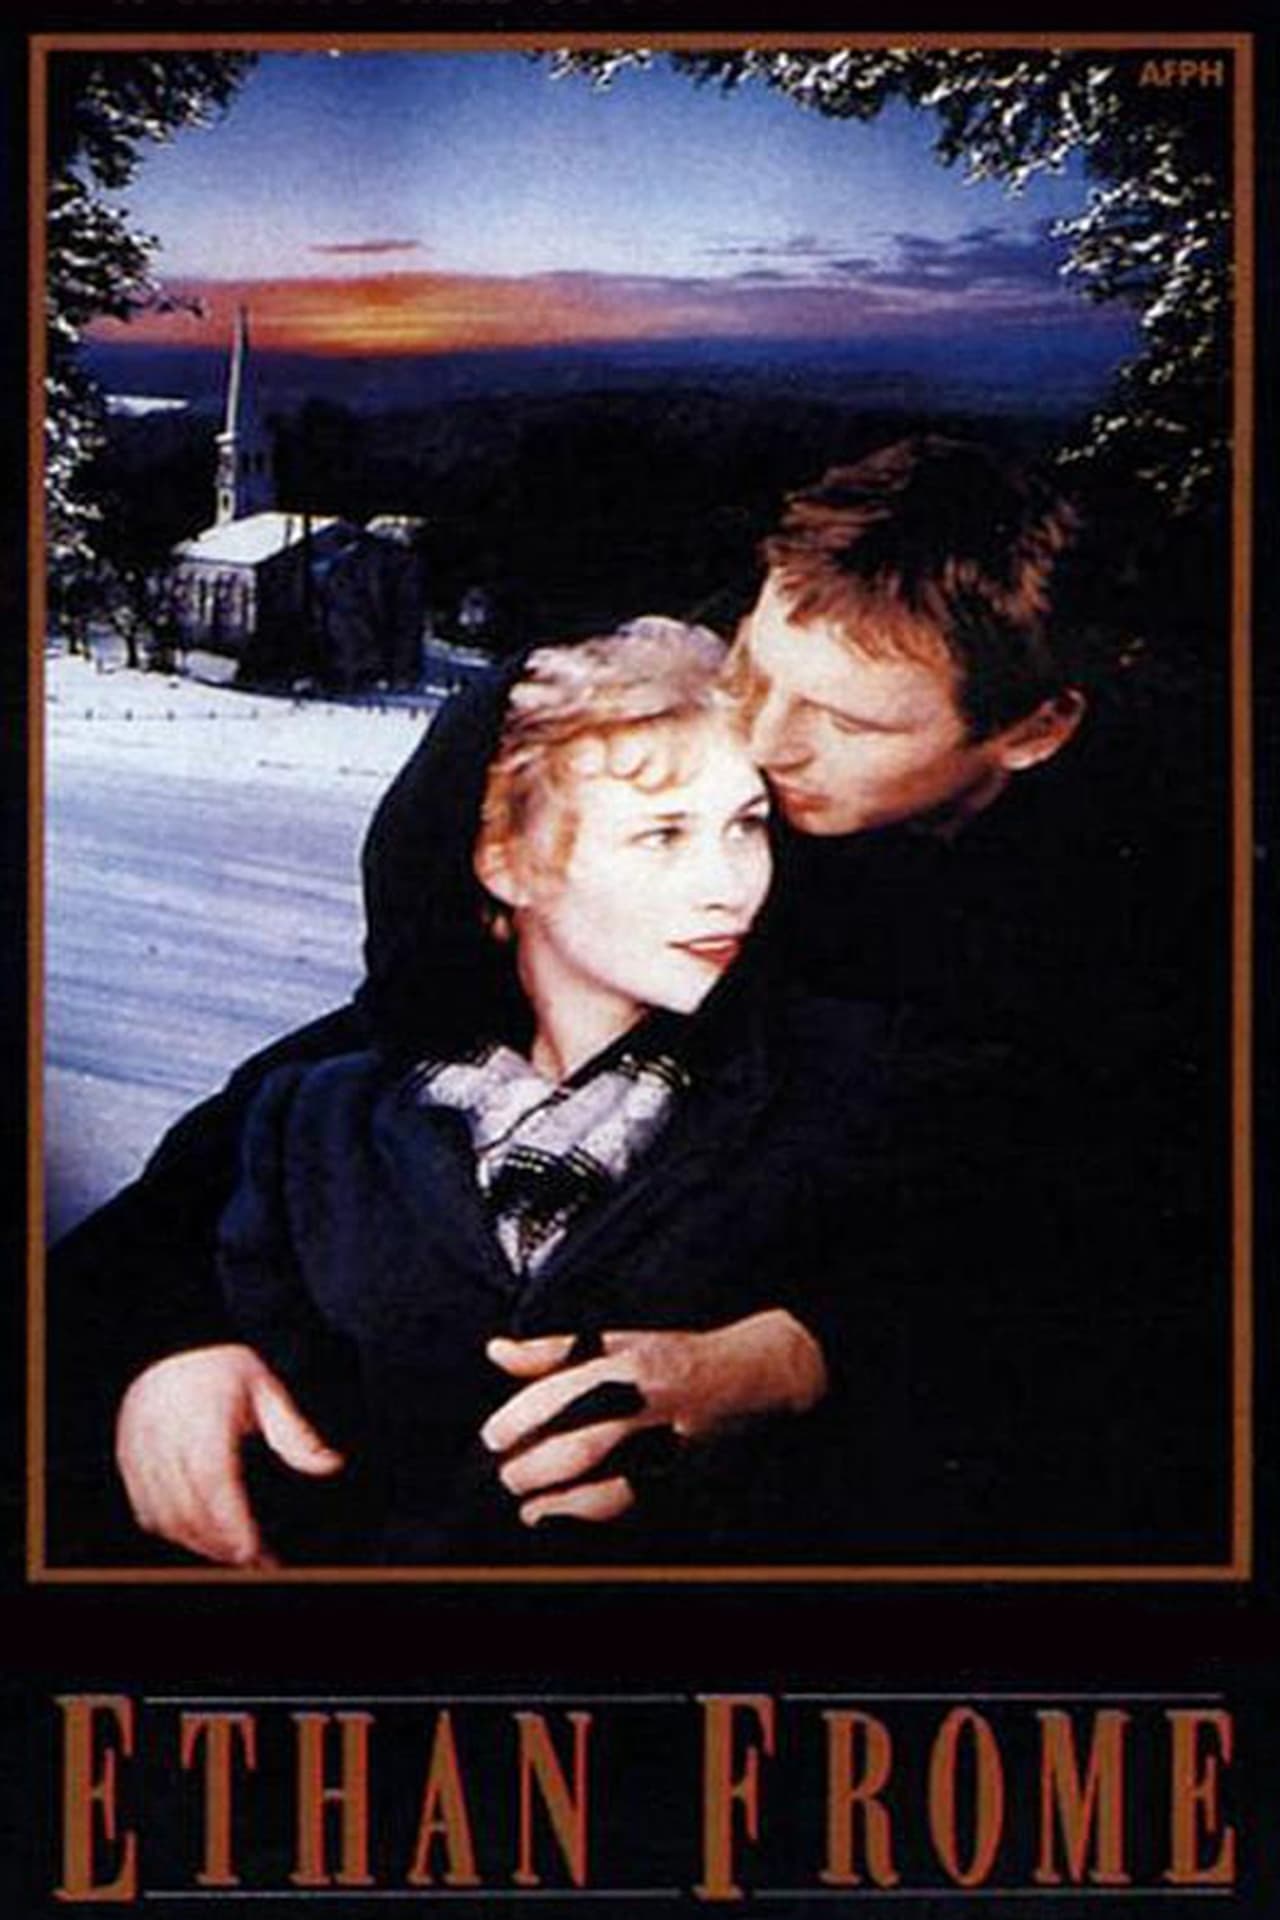 ethan frome movie review